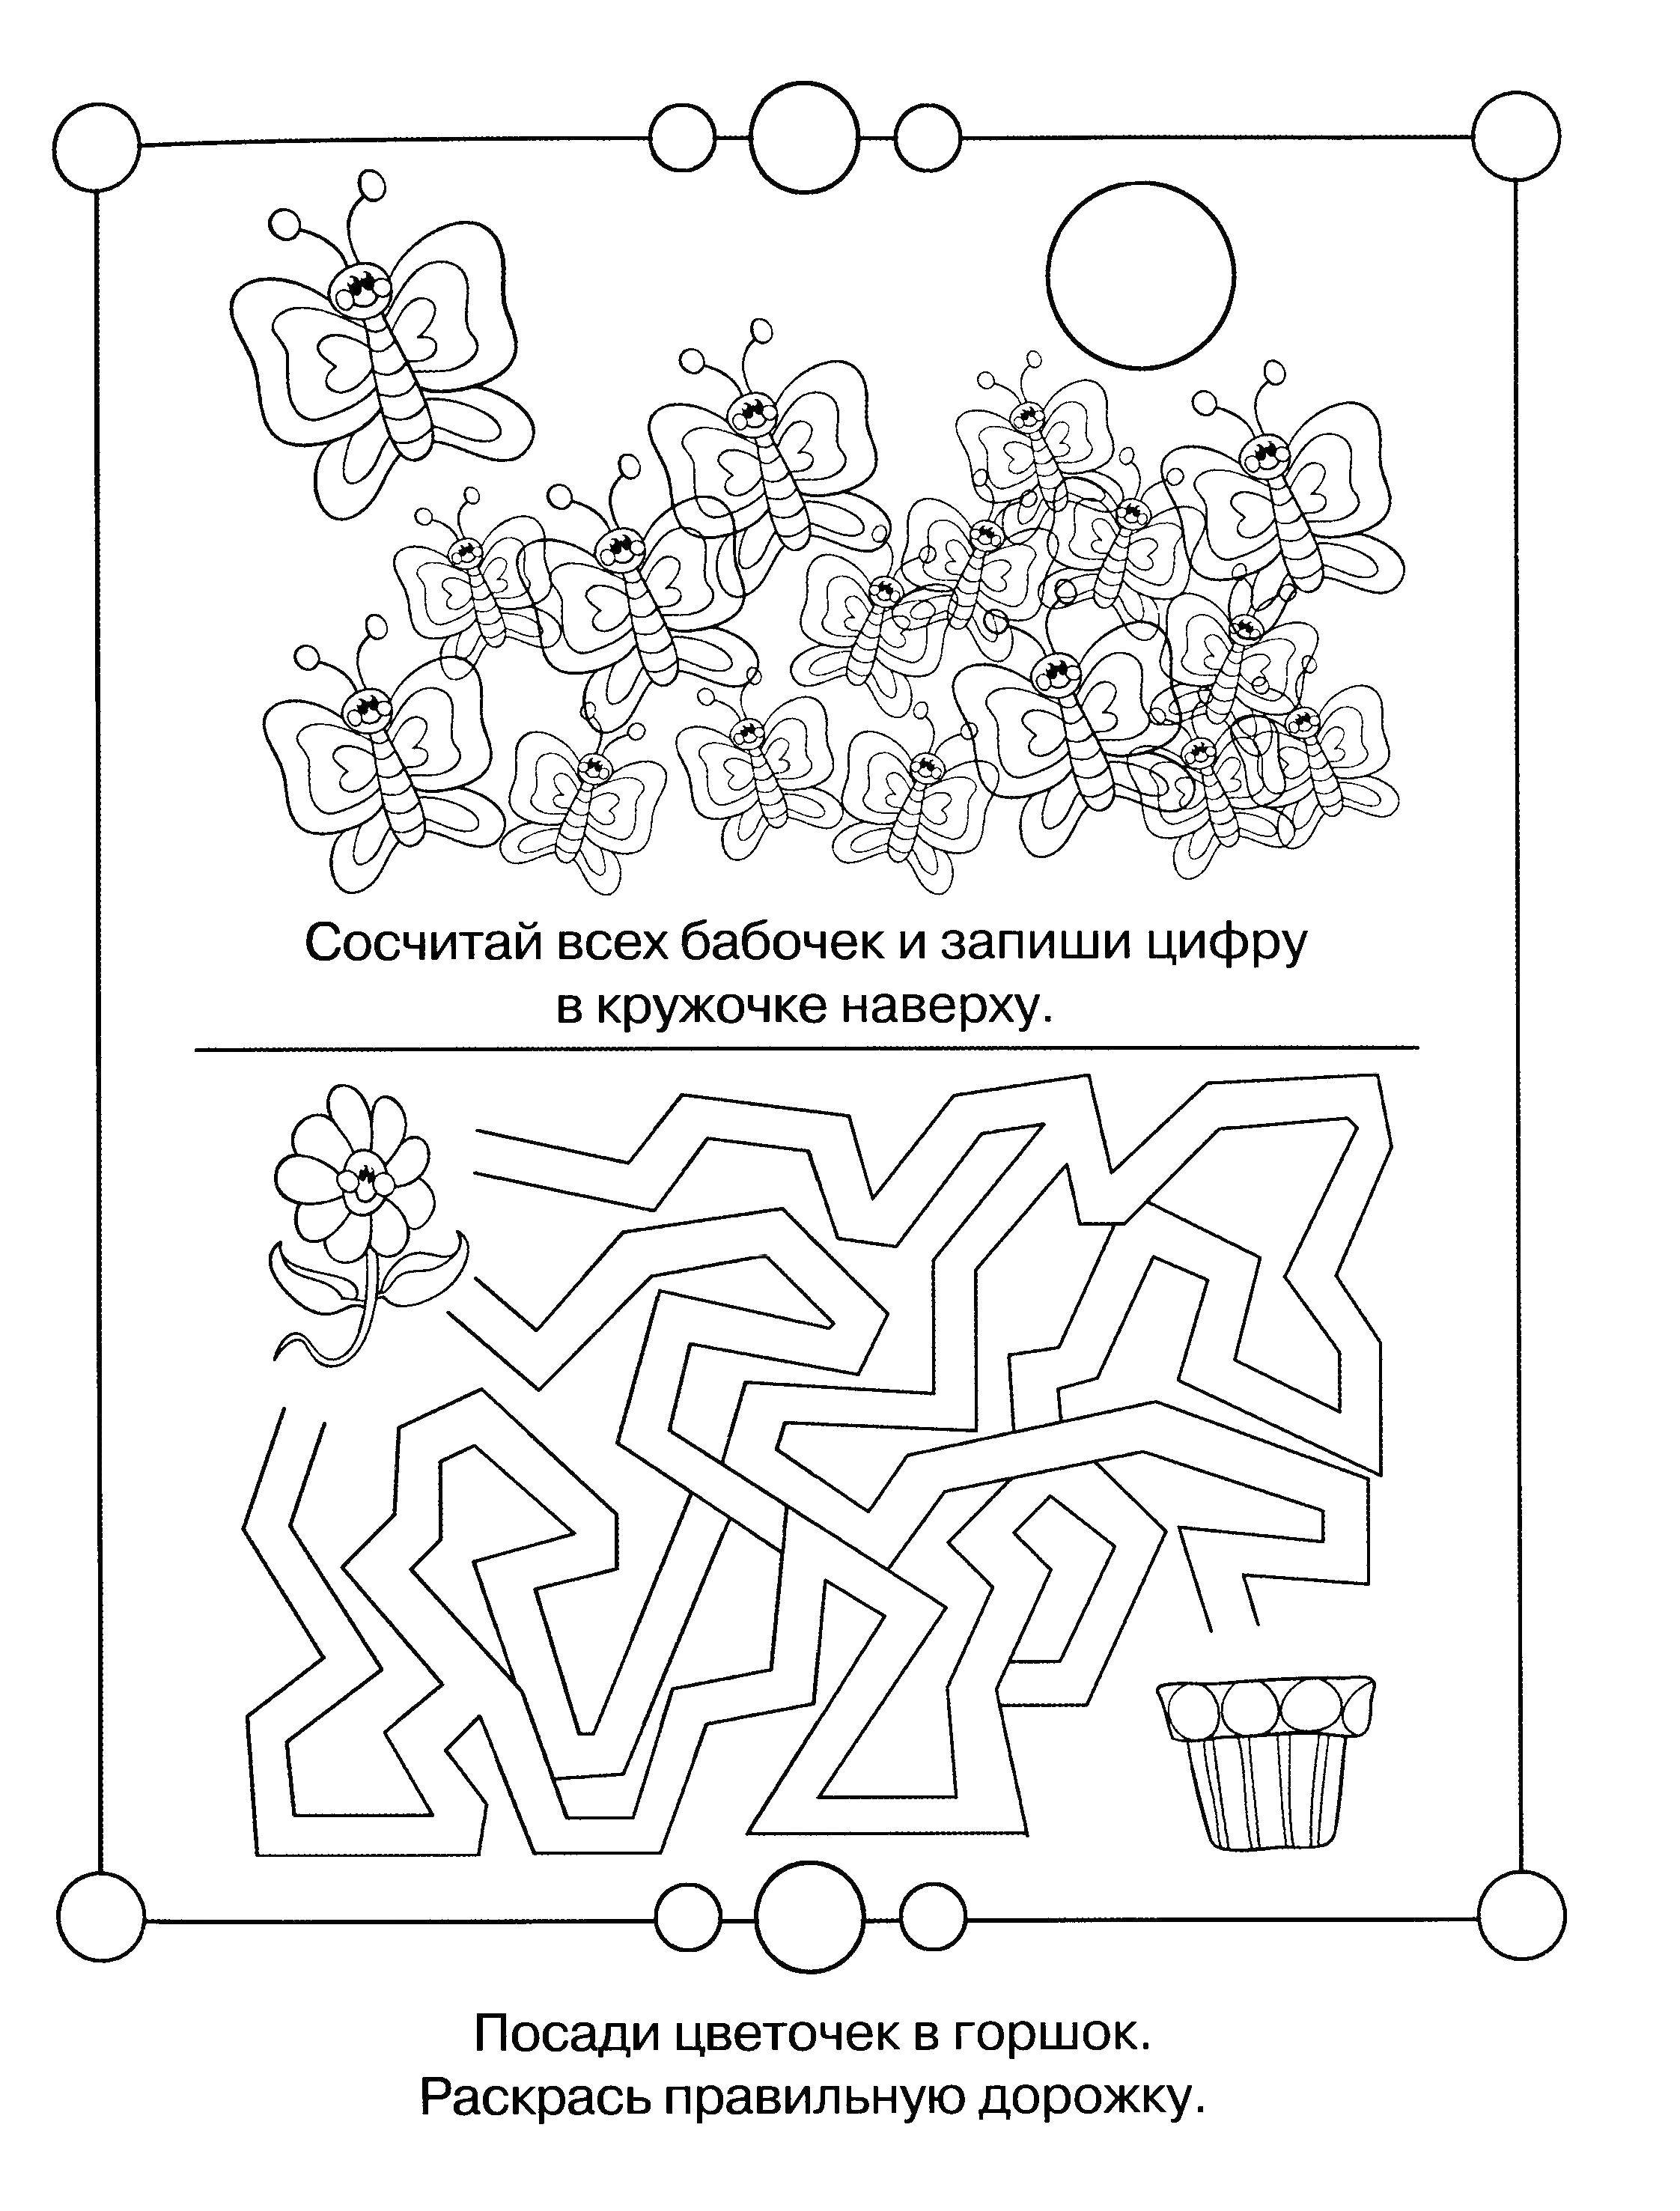 Coloring Plant a flower in a pot. Category riddles for kids. Tags:  Teaching coloring, logic.